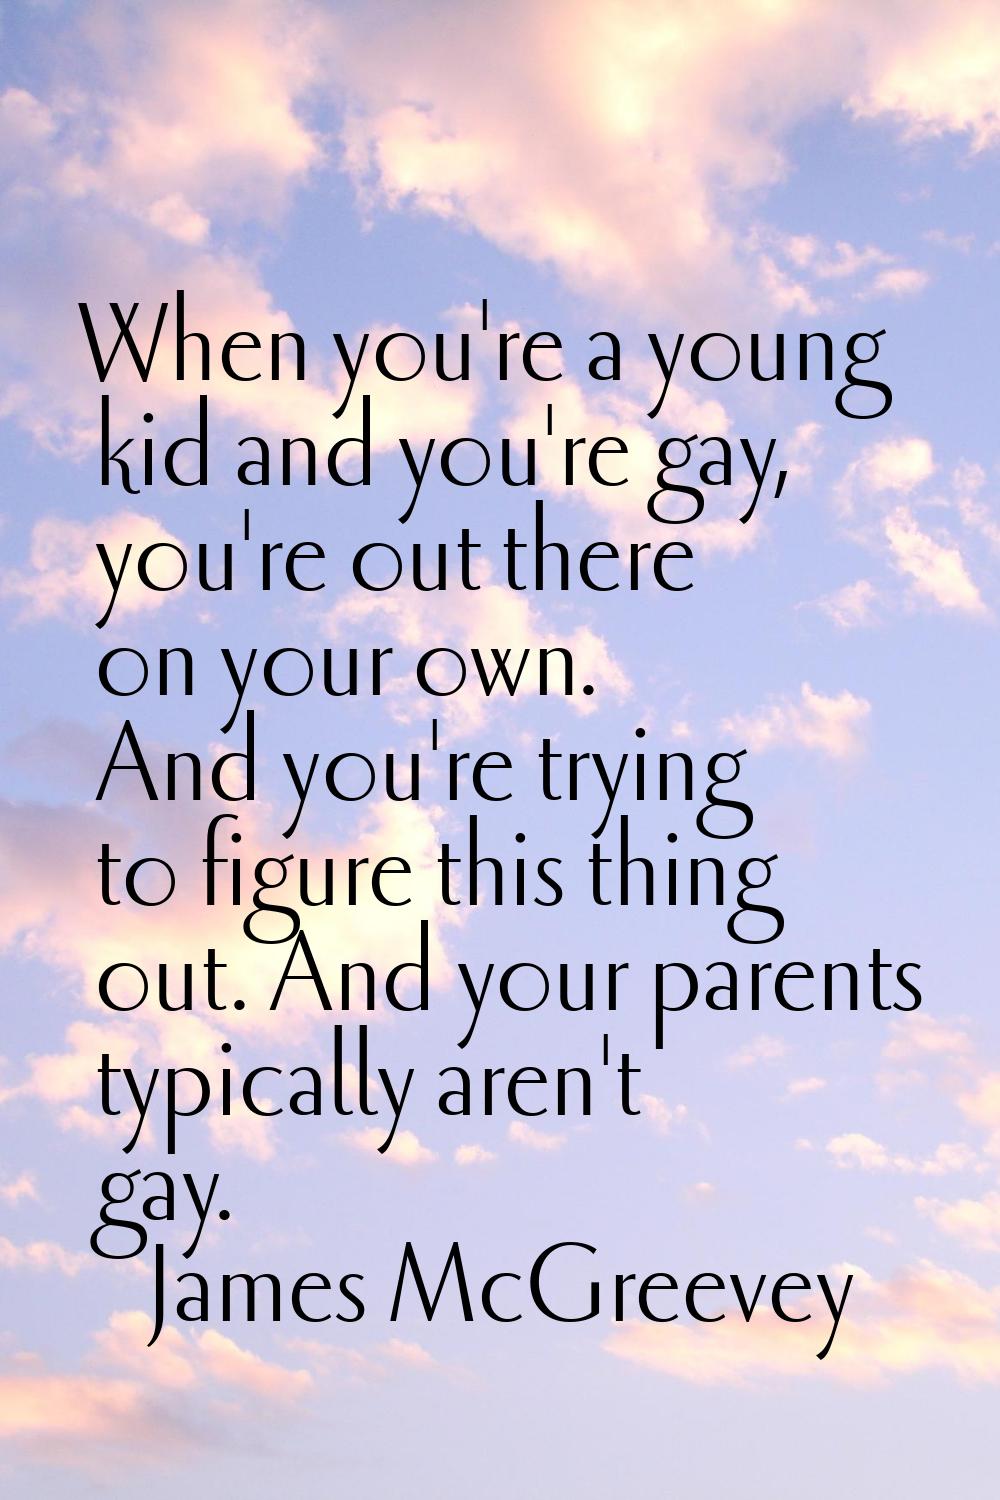 When you're a young kid and you're gay, you're out there on your own. And you're trying to figure t